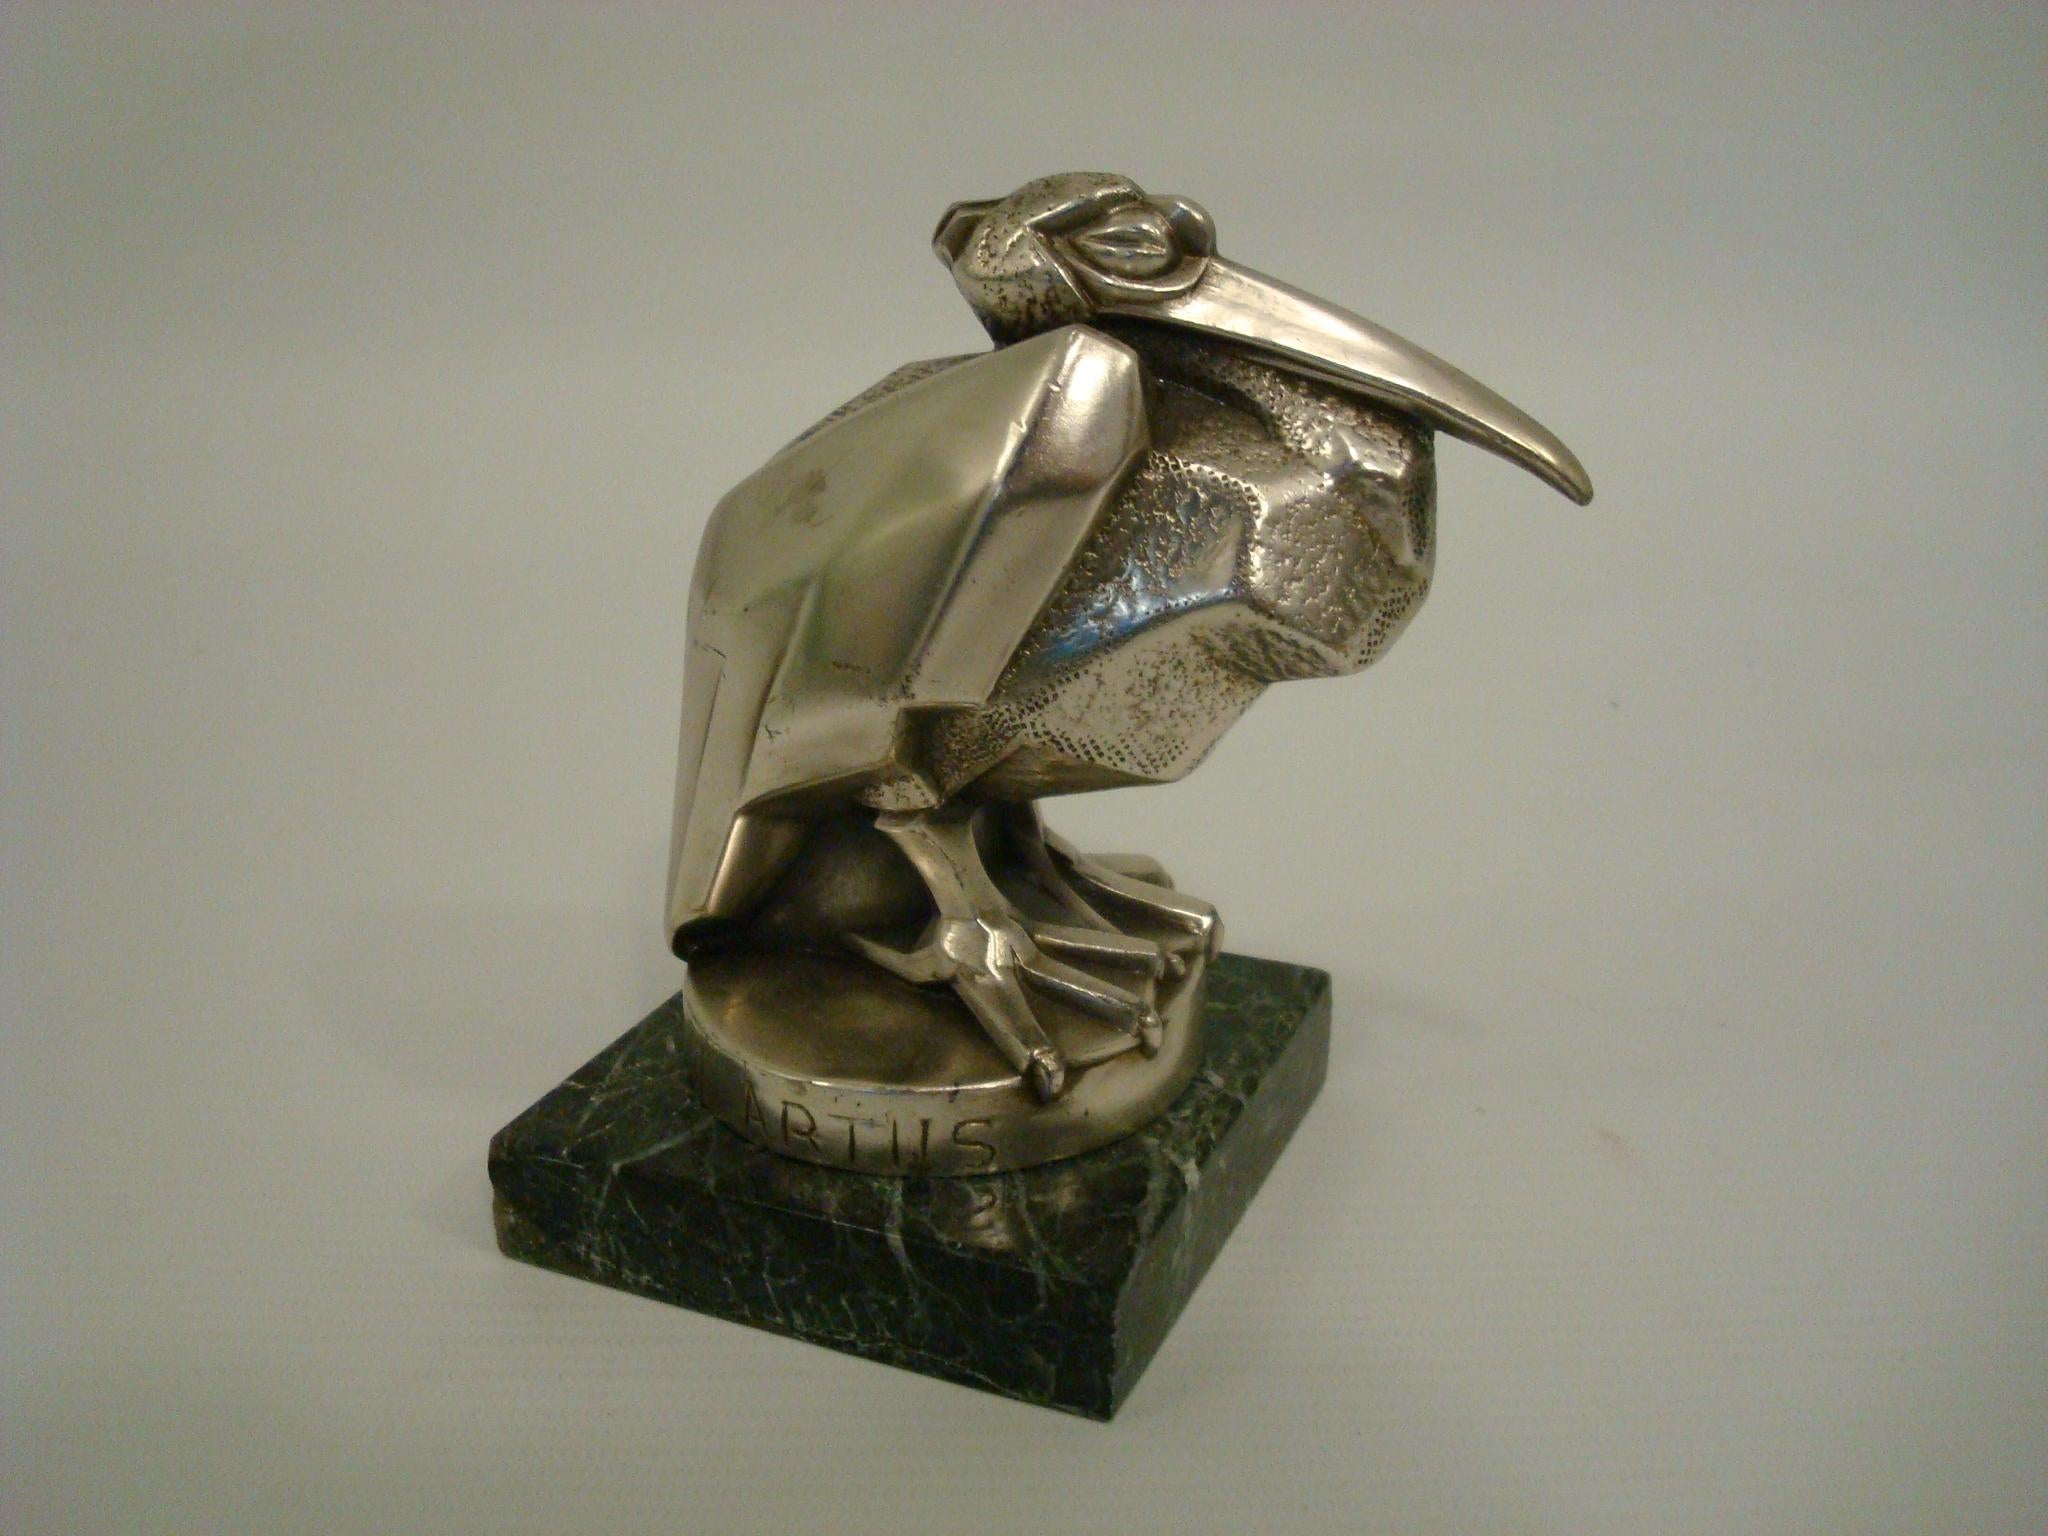 Art Deco Max Le Verrier / Artus Bird Hood Ornament / Paperweight - France.
Hard to find circa 1925 famous Pelican by Artus. (Pseudonym for Max Le Verrier).
Genuine period sculpture. Perfect Gift for any Car Mascots of Automobilia Fan.
   